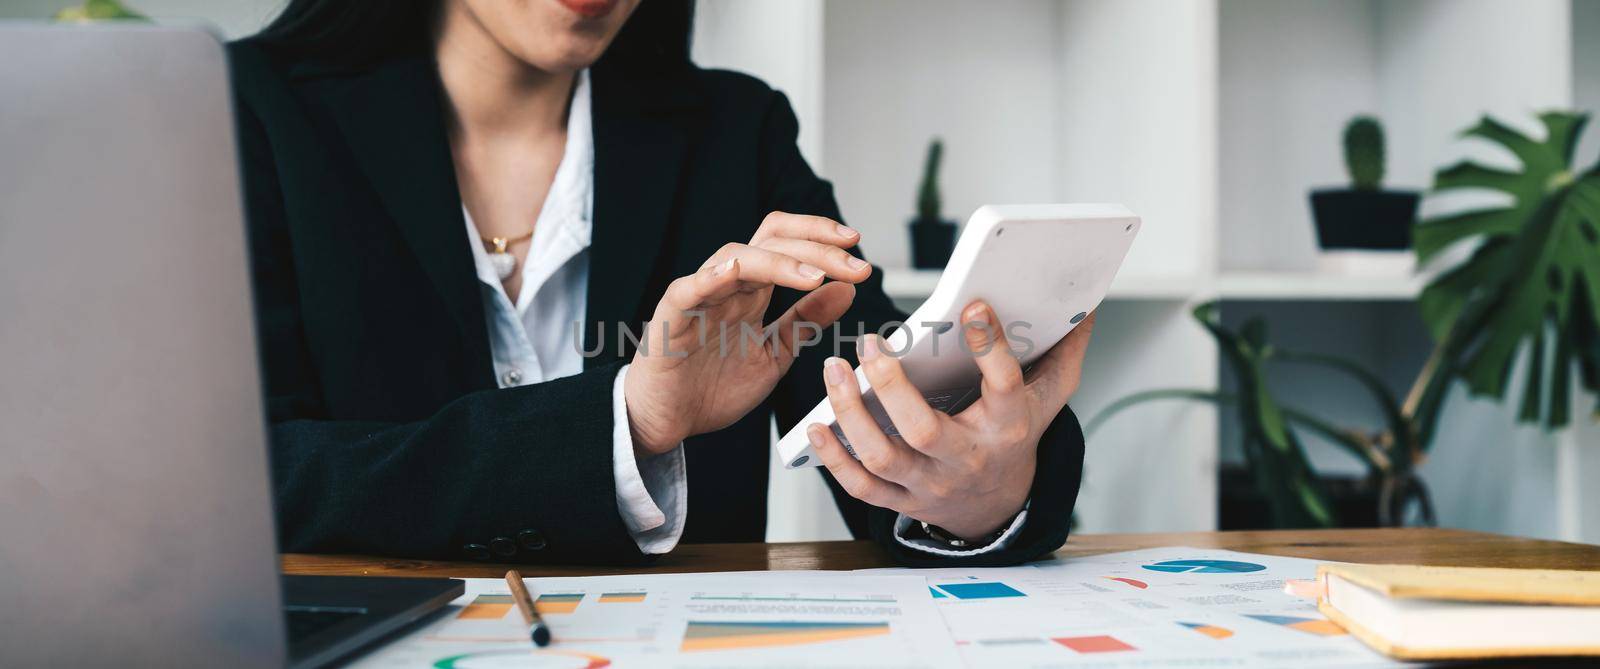 The company's finance manager is using a calculator, he uses a calculator to calculate the numbers in the company's financial documents that employees in the department create as meeting documents